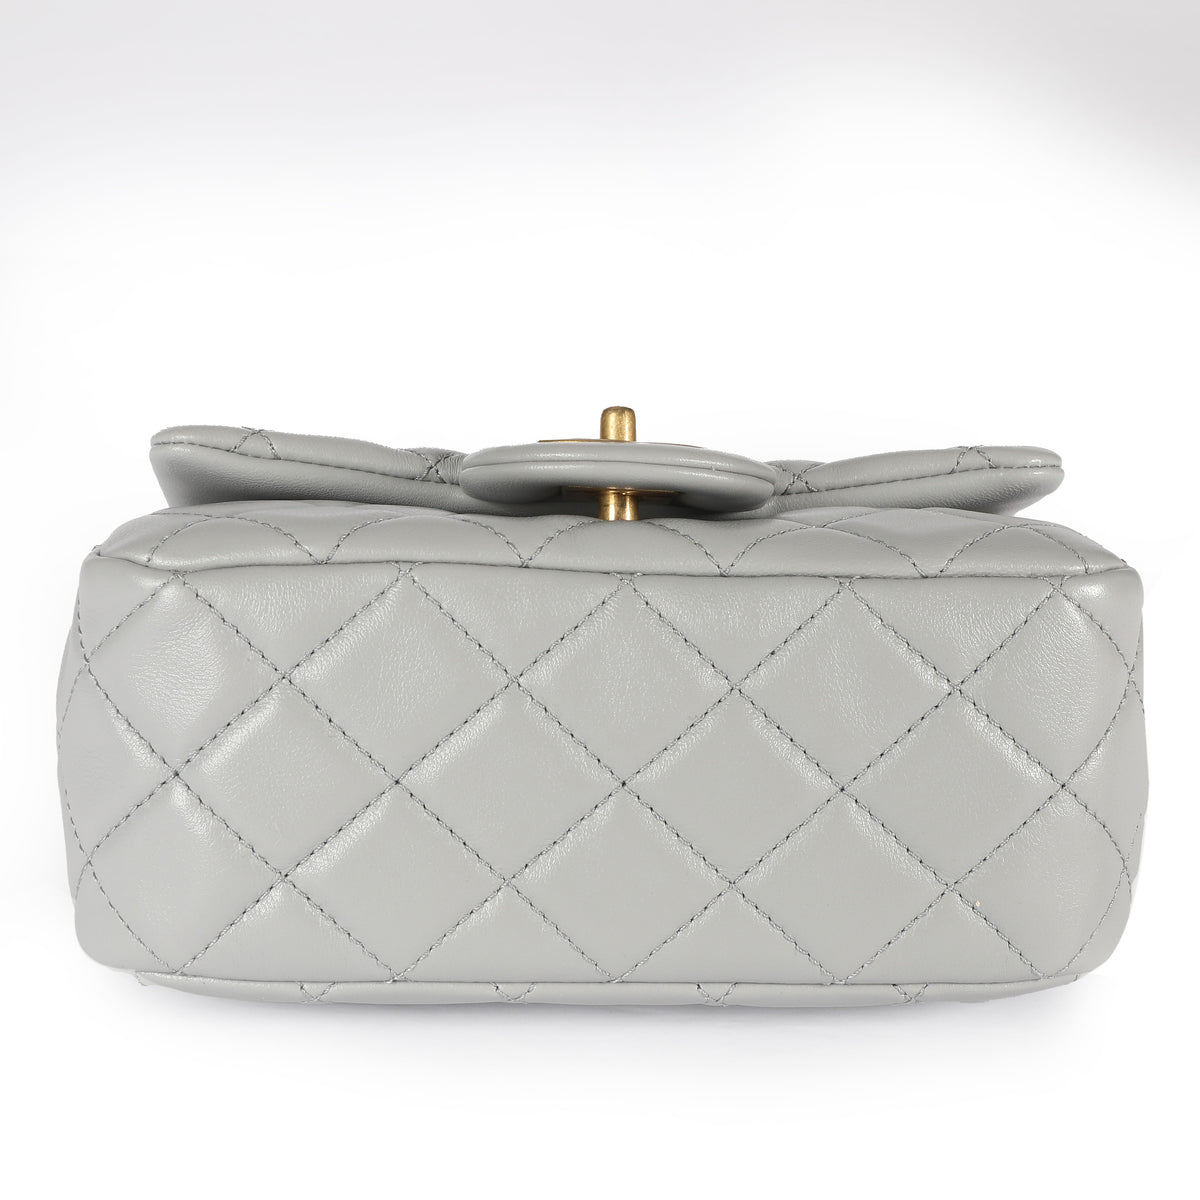 Chanel Gray Quilted Lambskin Pearl Crush Mini Flap Bag